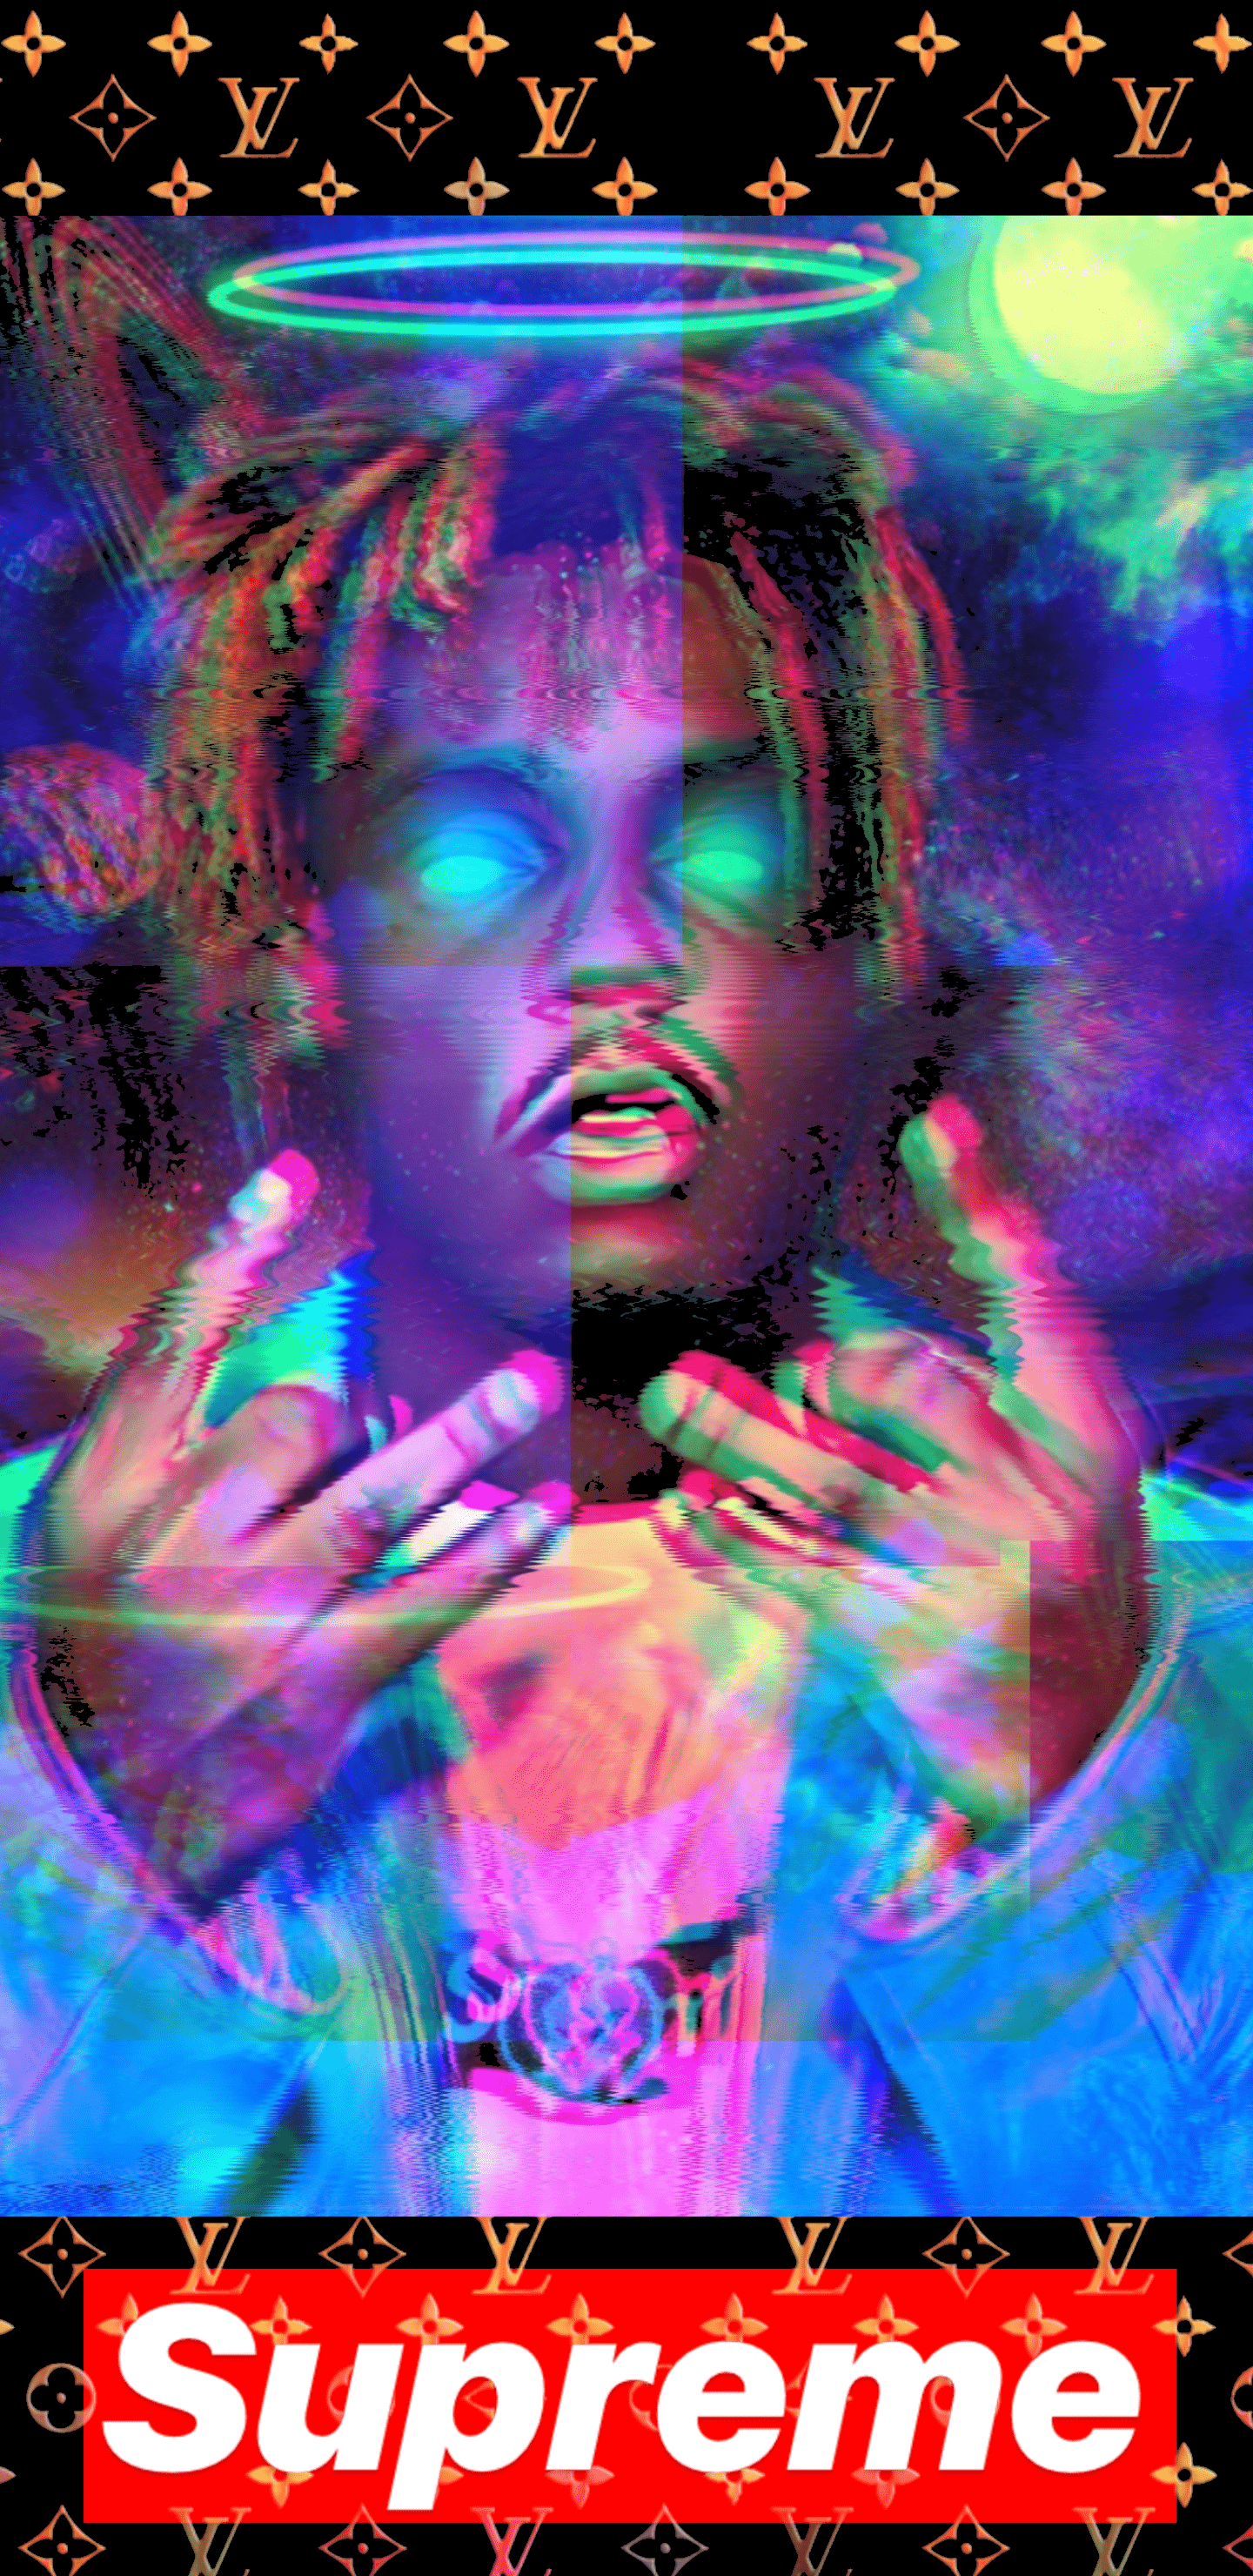 DDM qaudex on Twitter I made a LILUZIVERT and a juice WRLD wallpaper  along with another that has like 50 albums httpstcox4o2D1qGKz   Twitter